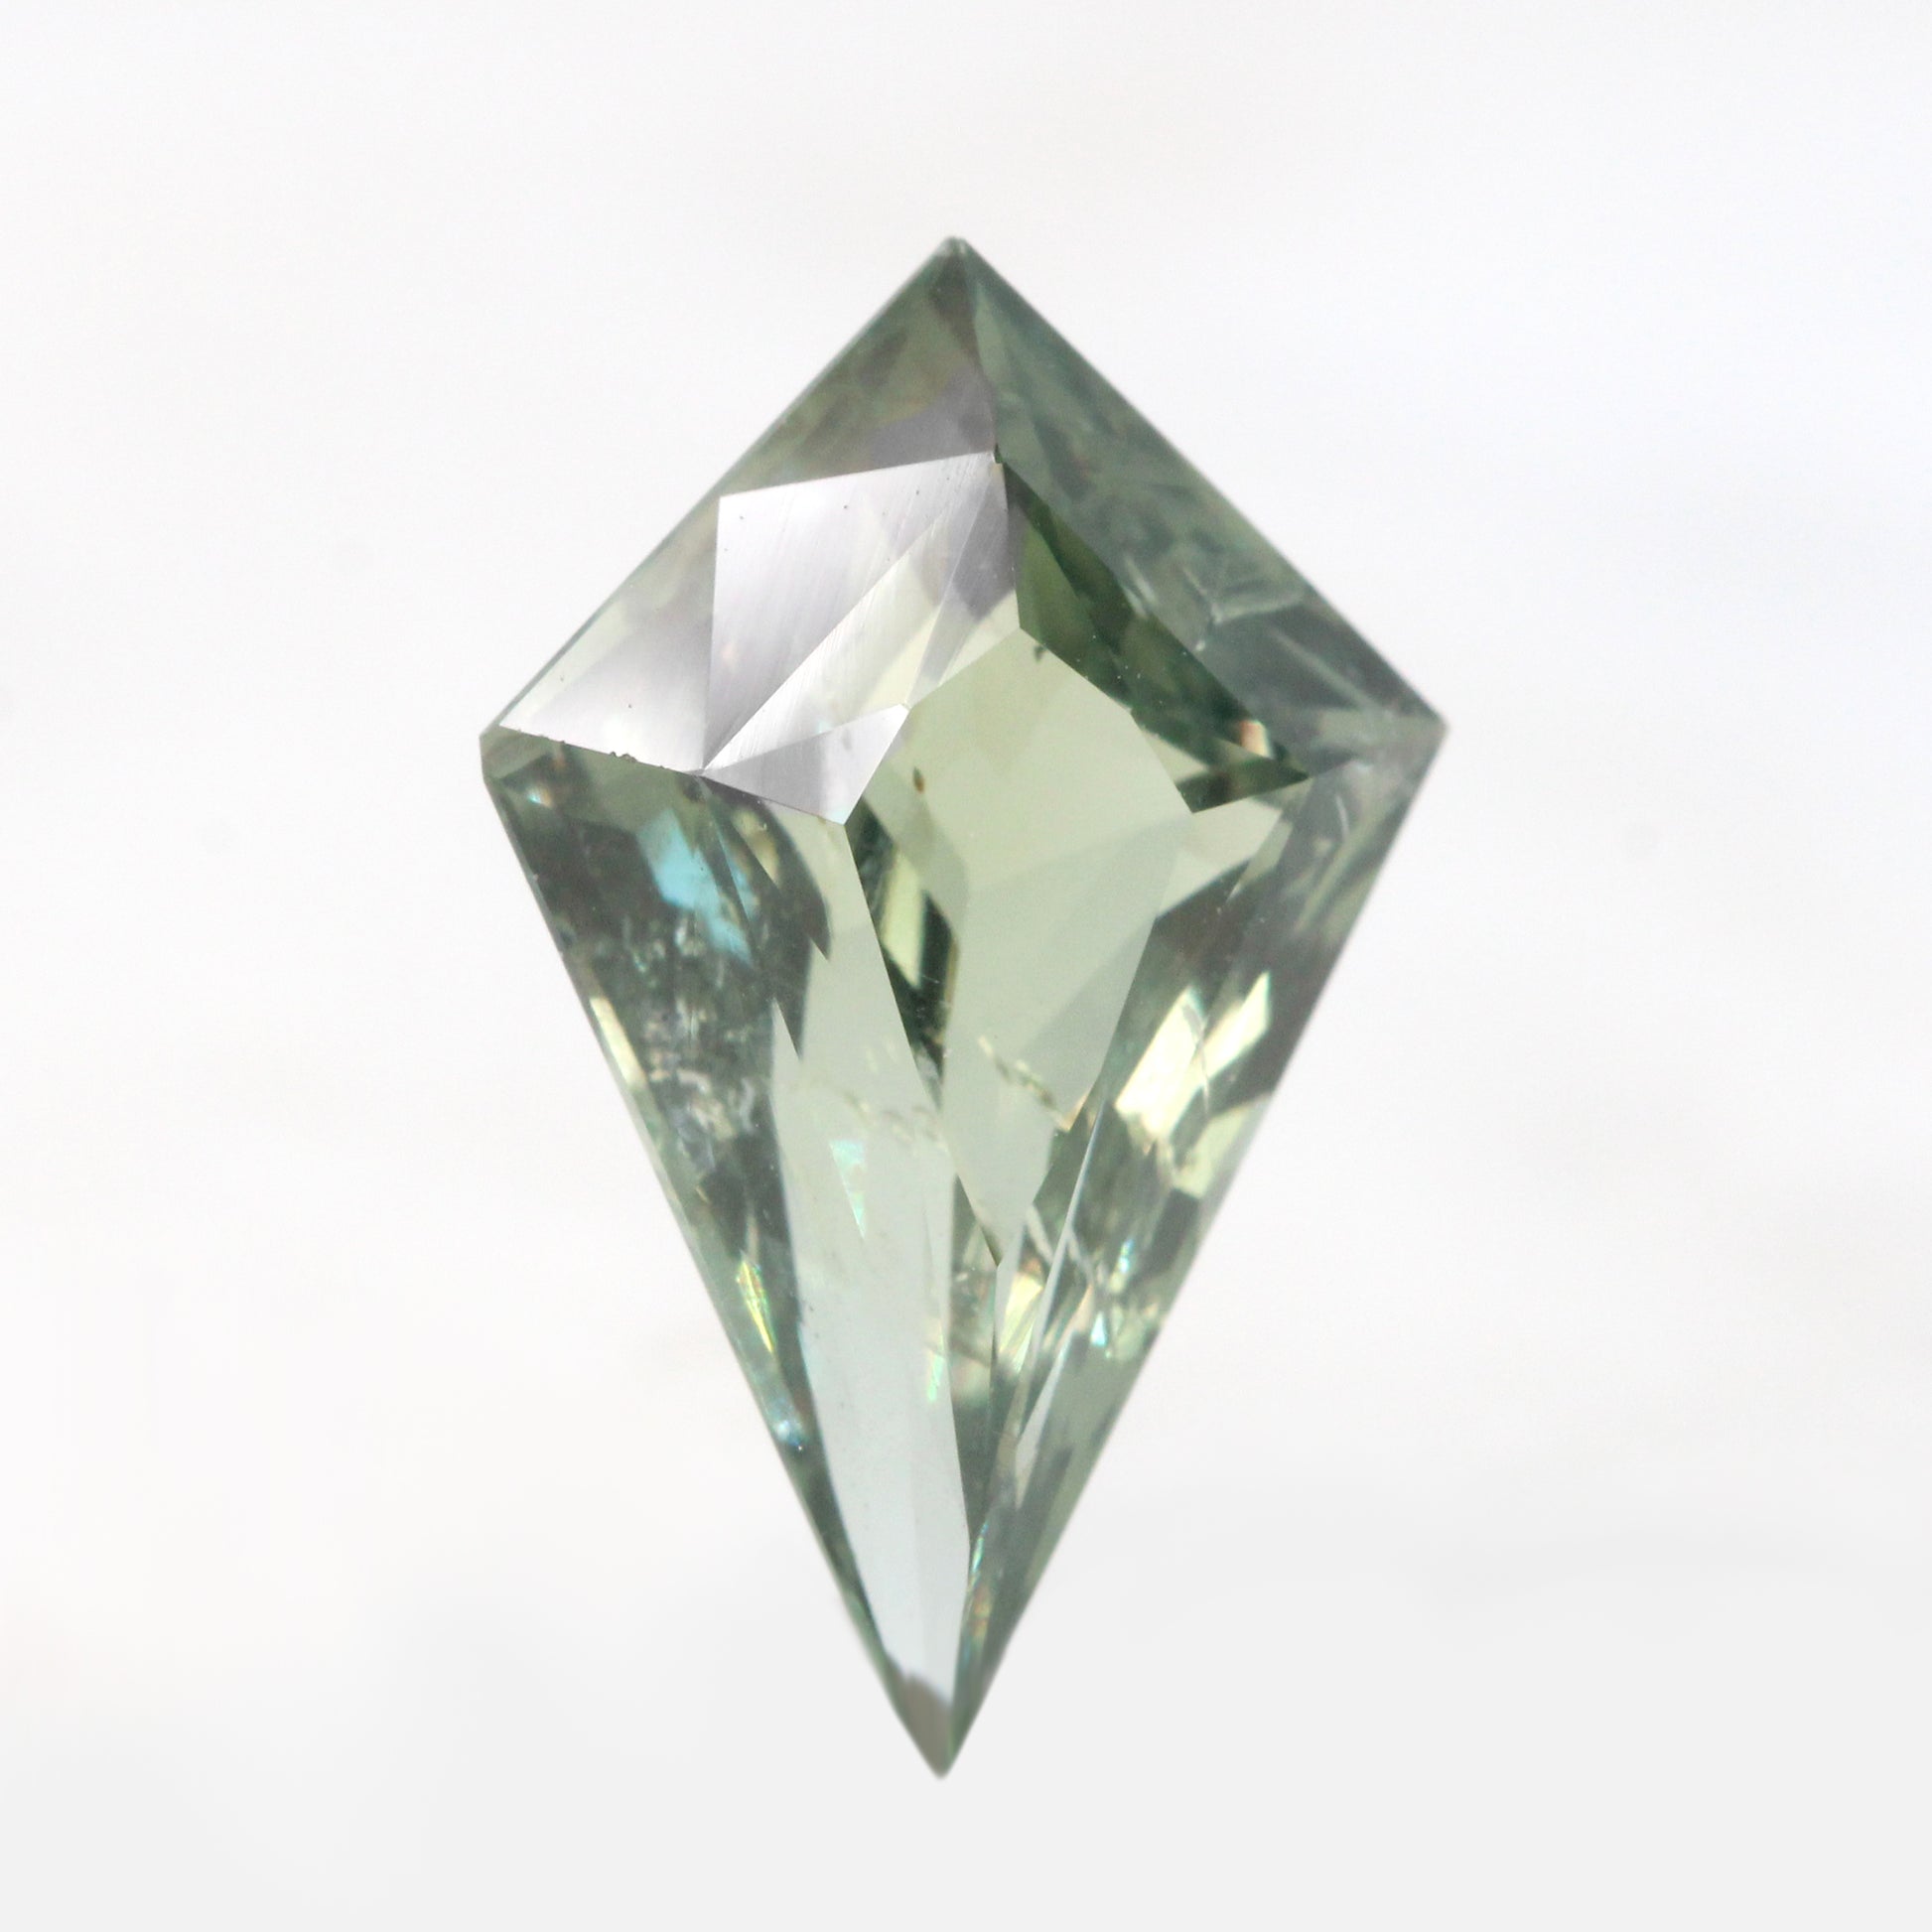 3.66 Carat Light Green Kite Sapphire for Custom Work - Inventory Code GKS366 - Midwinter Co. Alternative Bridal Rings and Modern Fine Jewelry